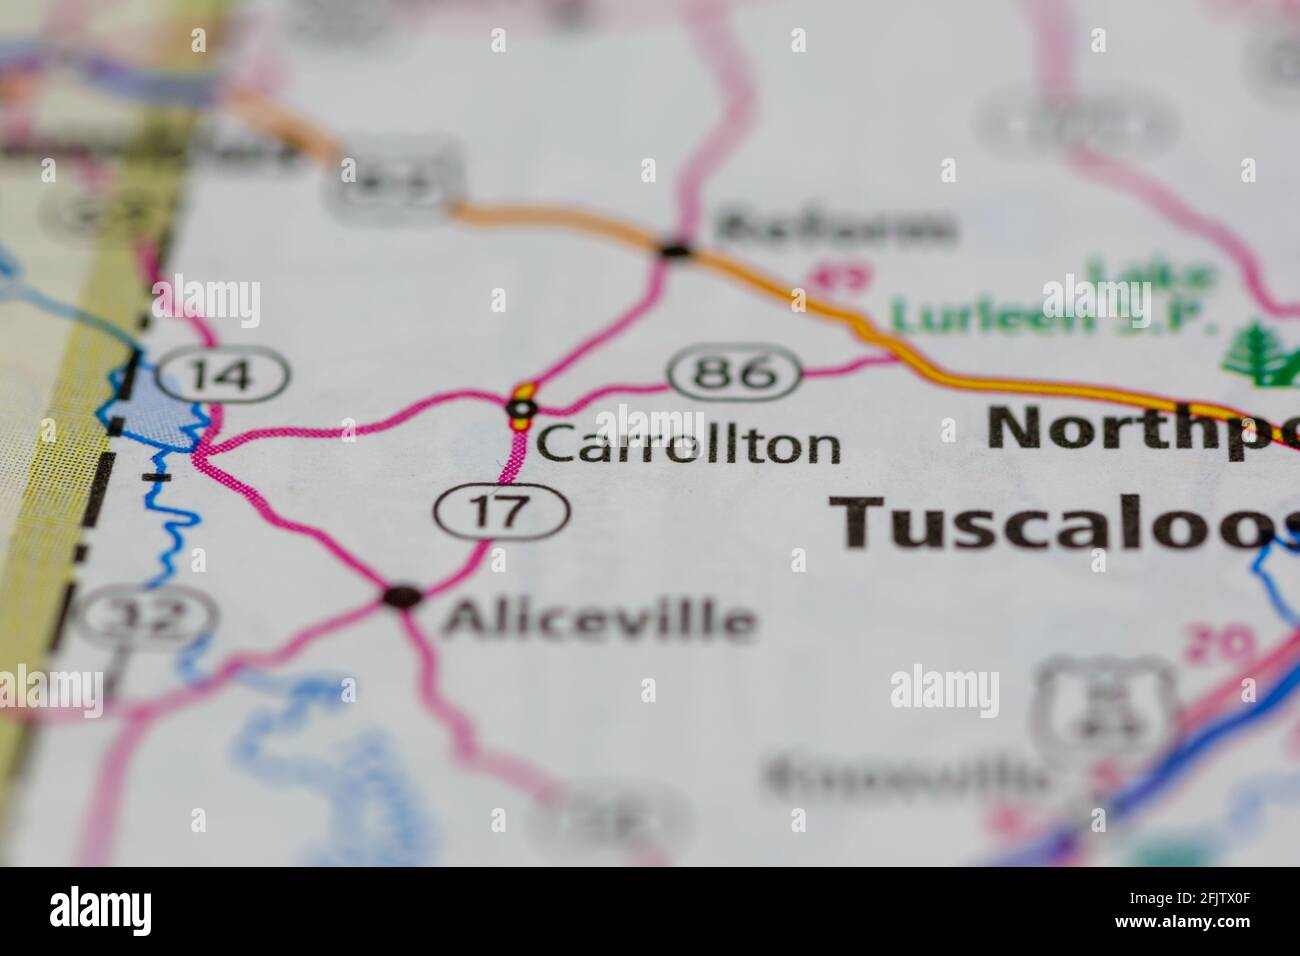 Carrollton Alabama USA shown on a road map or geography map Stock Photo